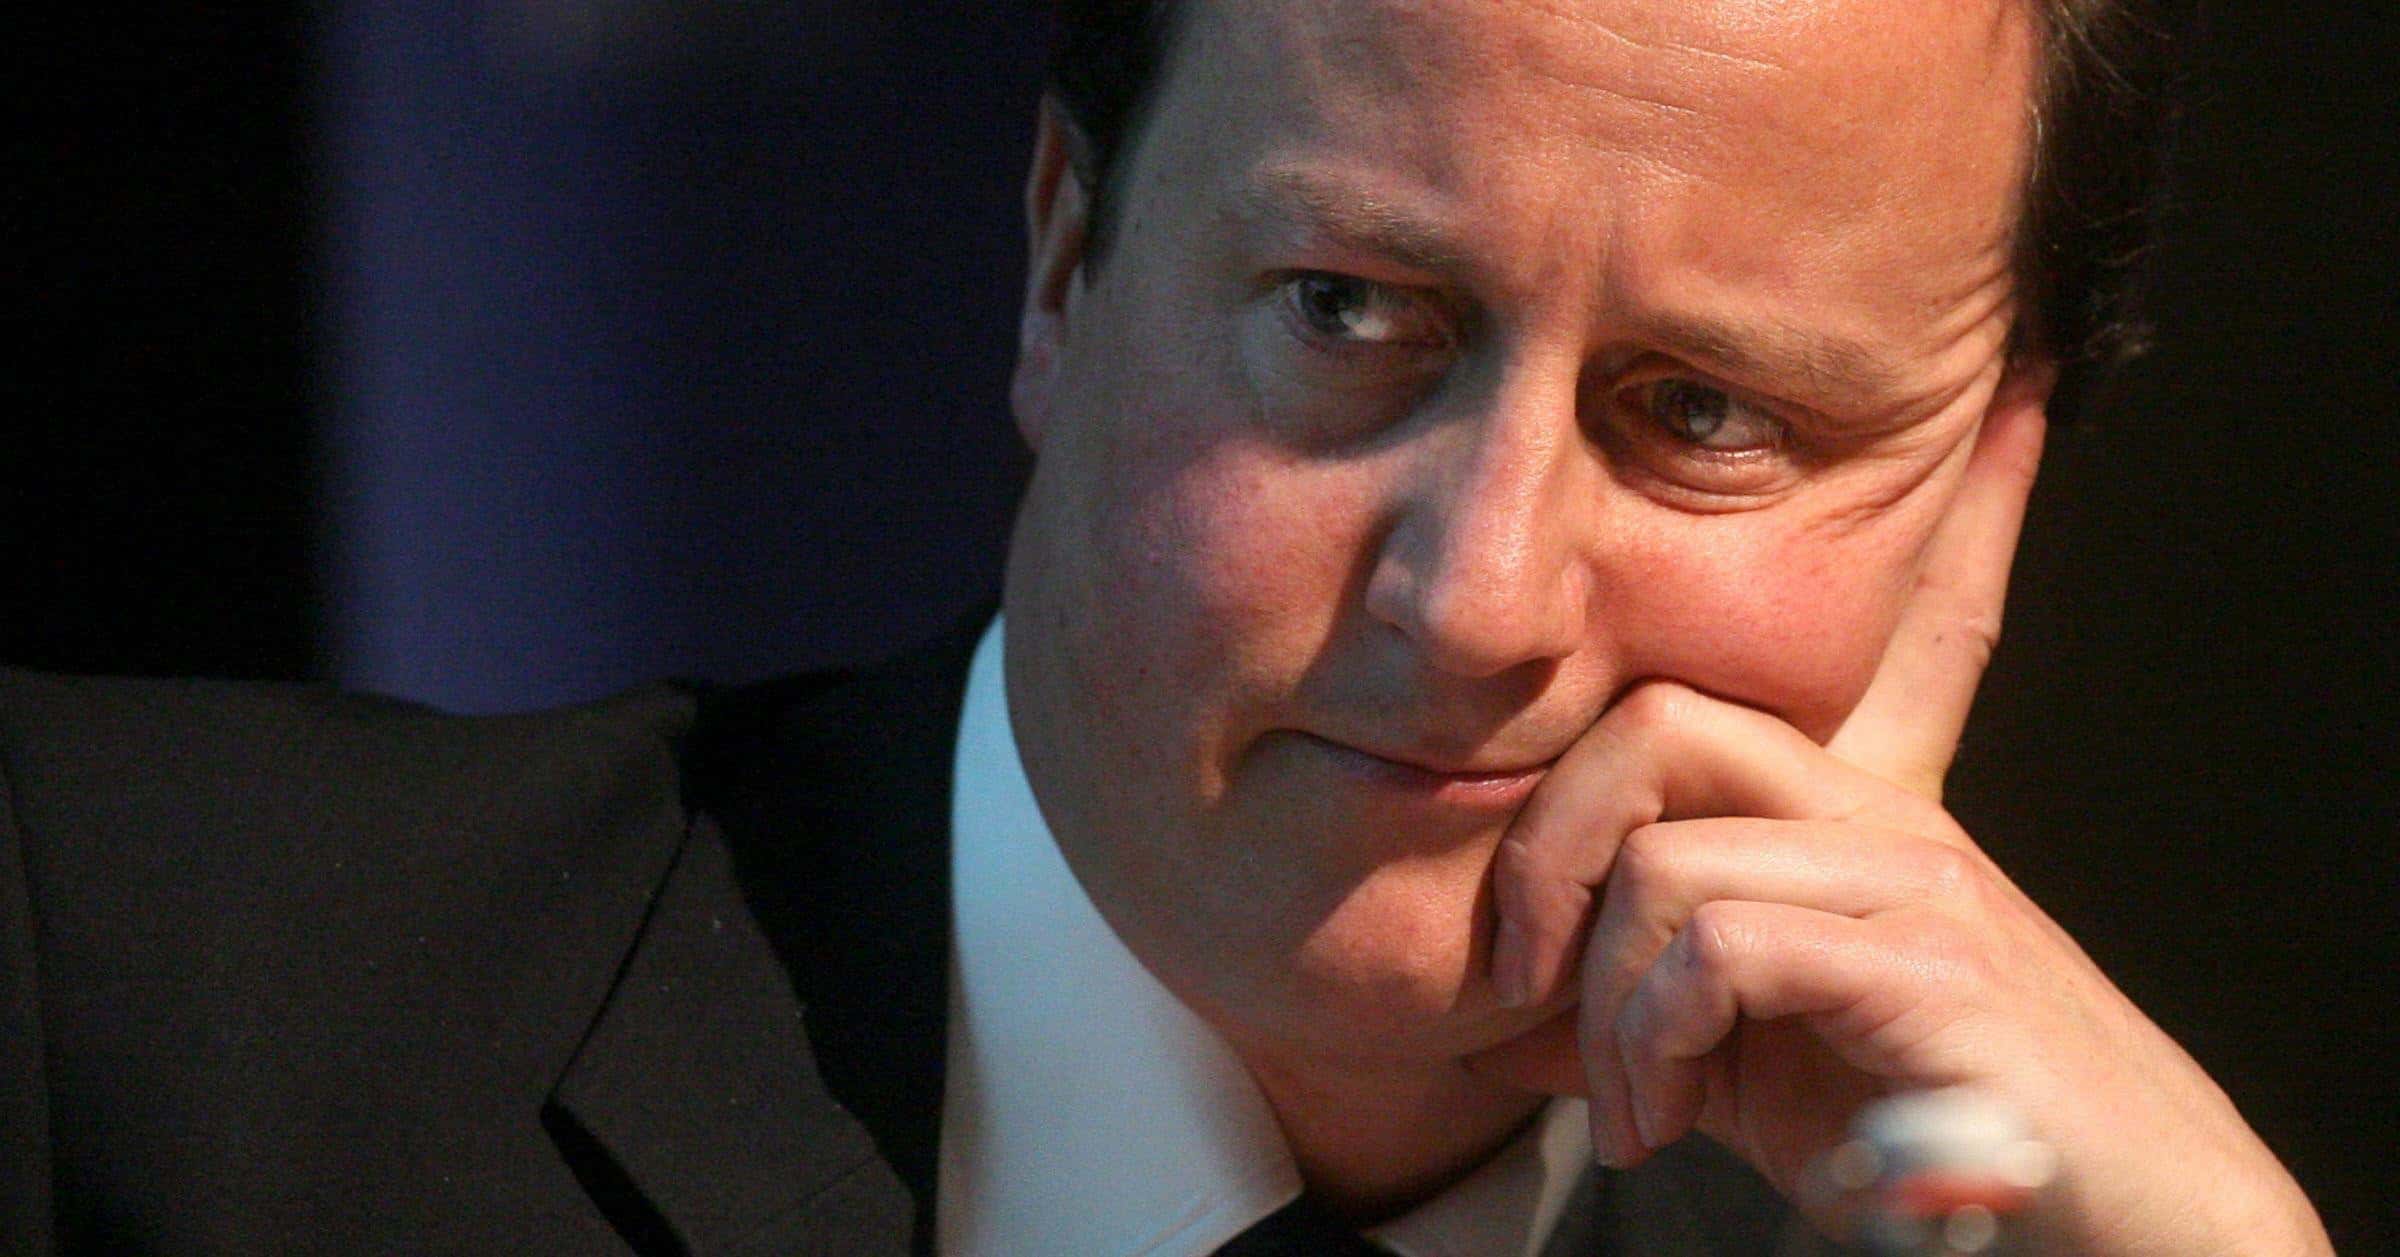 Cameron met vaccines minister months before firm he advises won health contracts